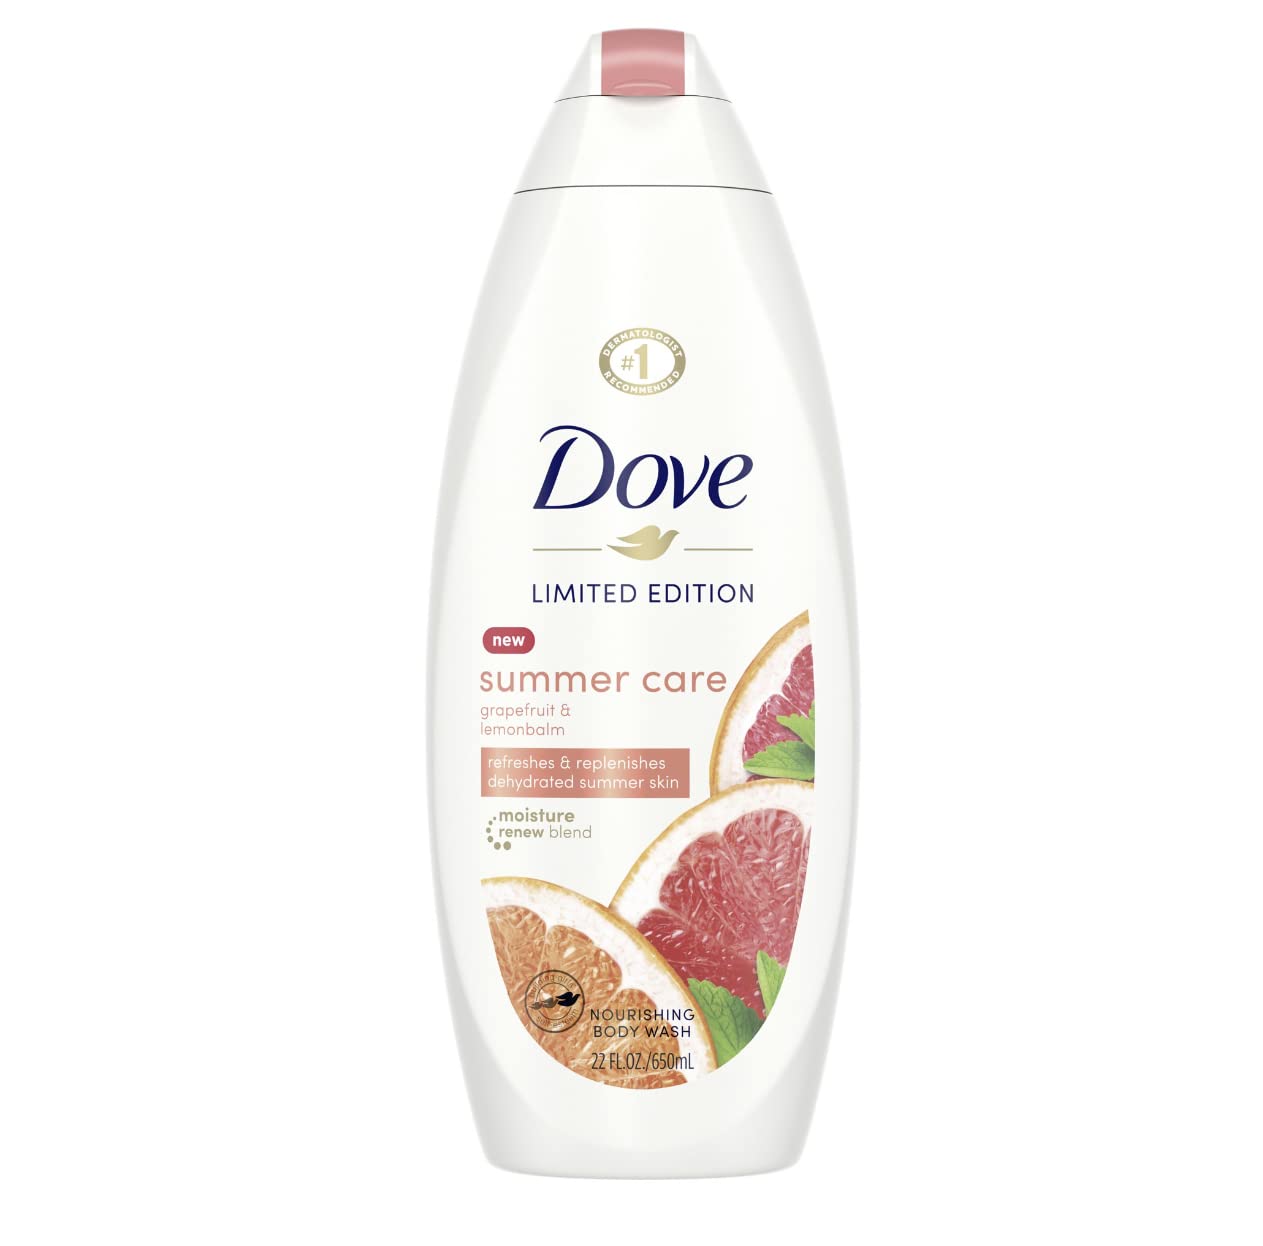 Dove Limited Edition Summer care Nourishing Body Wash